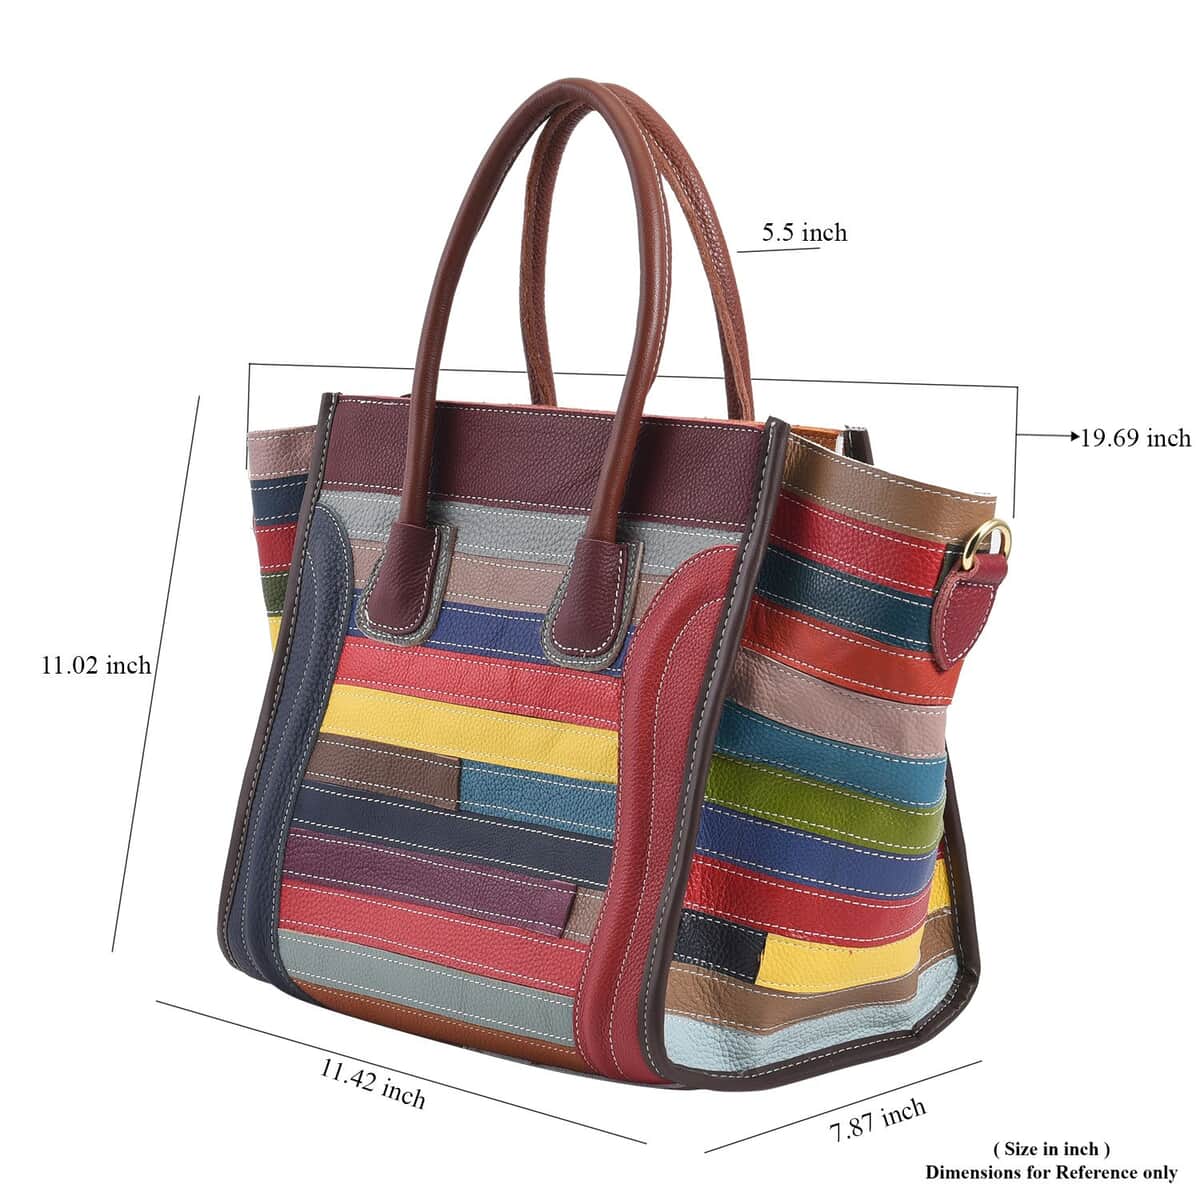 CHAOS Rainbow Color Patchwork Genuine Leather Convertible Tote Bag (19.69"x7.87"x11.02") with Long Shoulder Strap image number 6